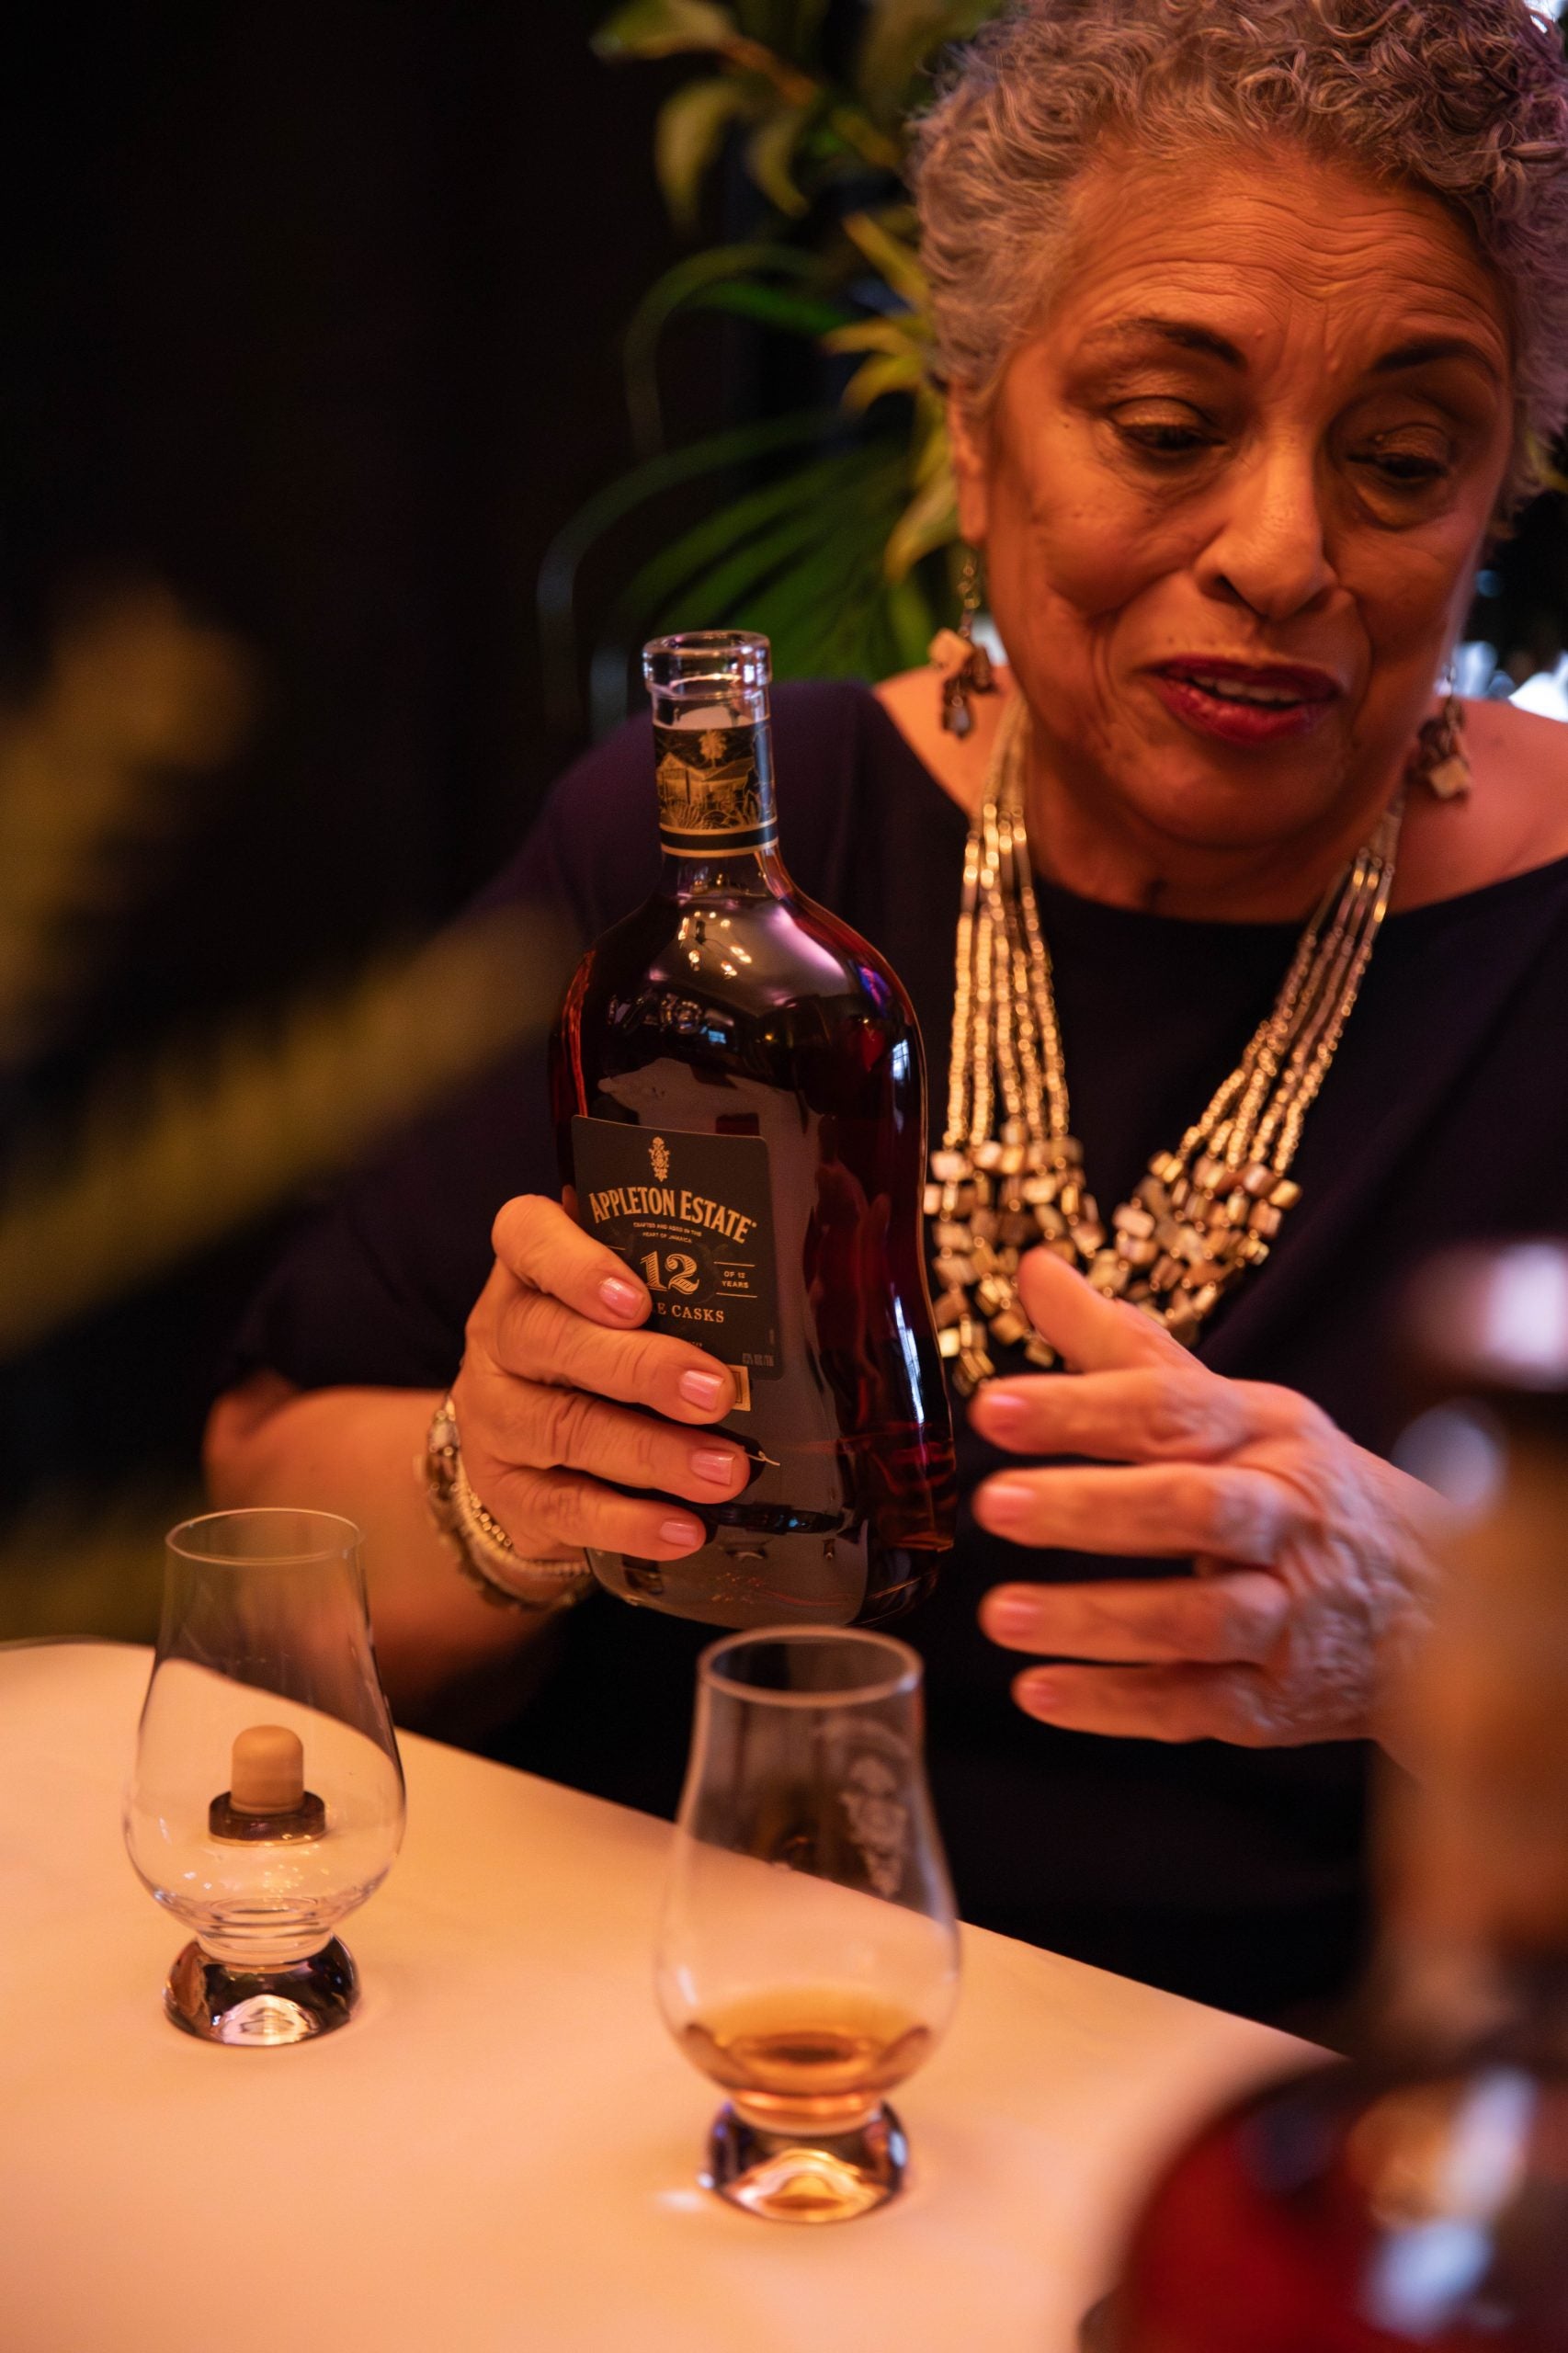 The First Female Master Blender Is A Black Woman. Here’s Why She Values Impact Over Accolades